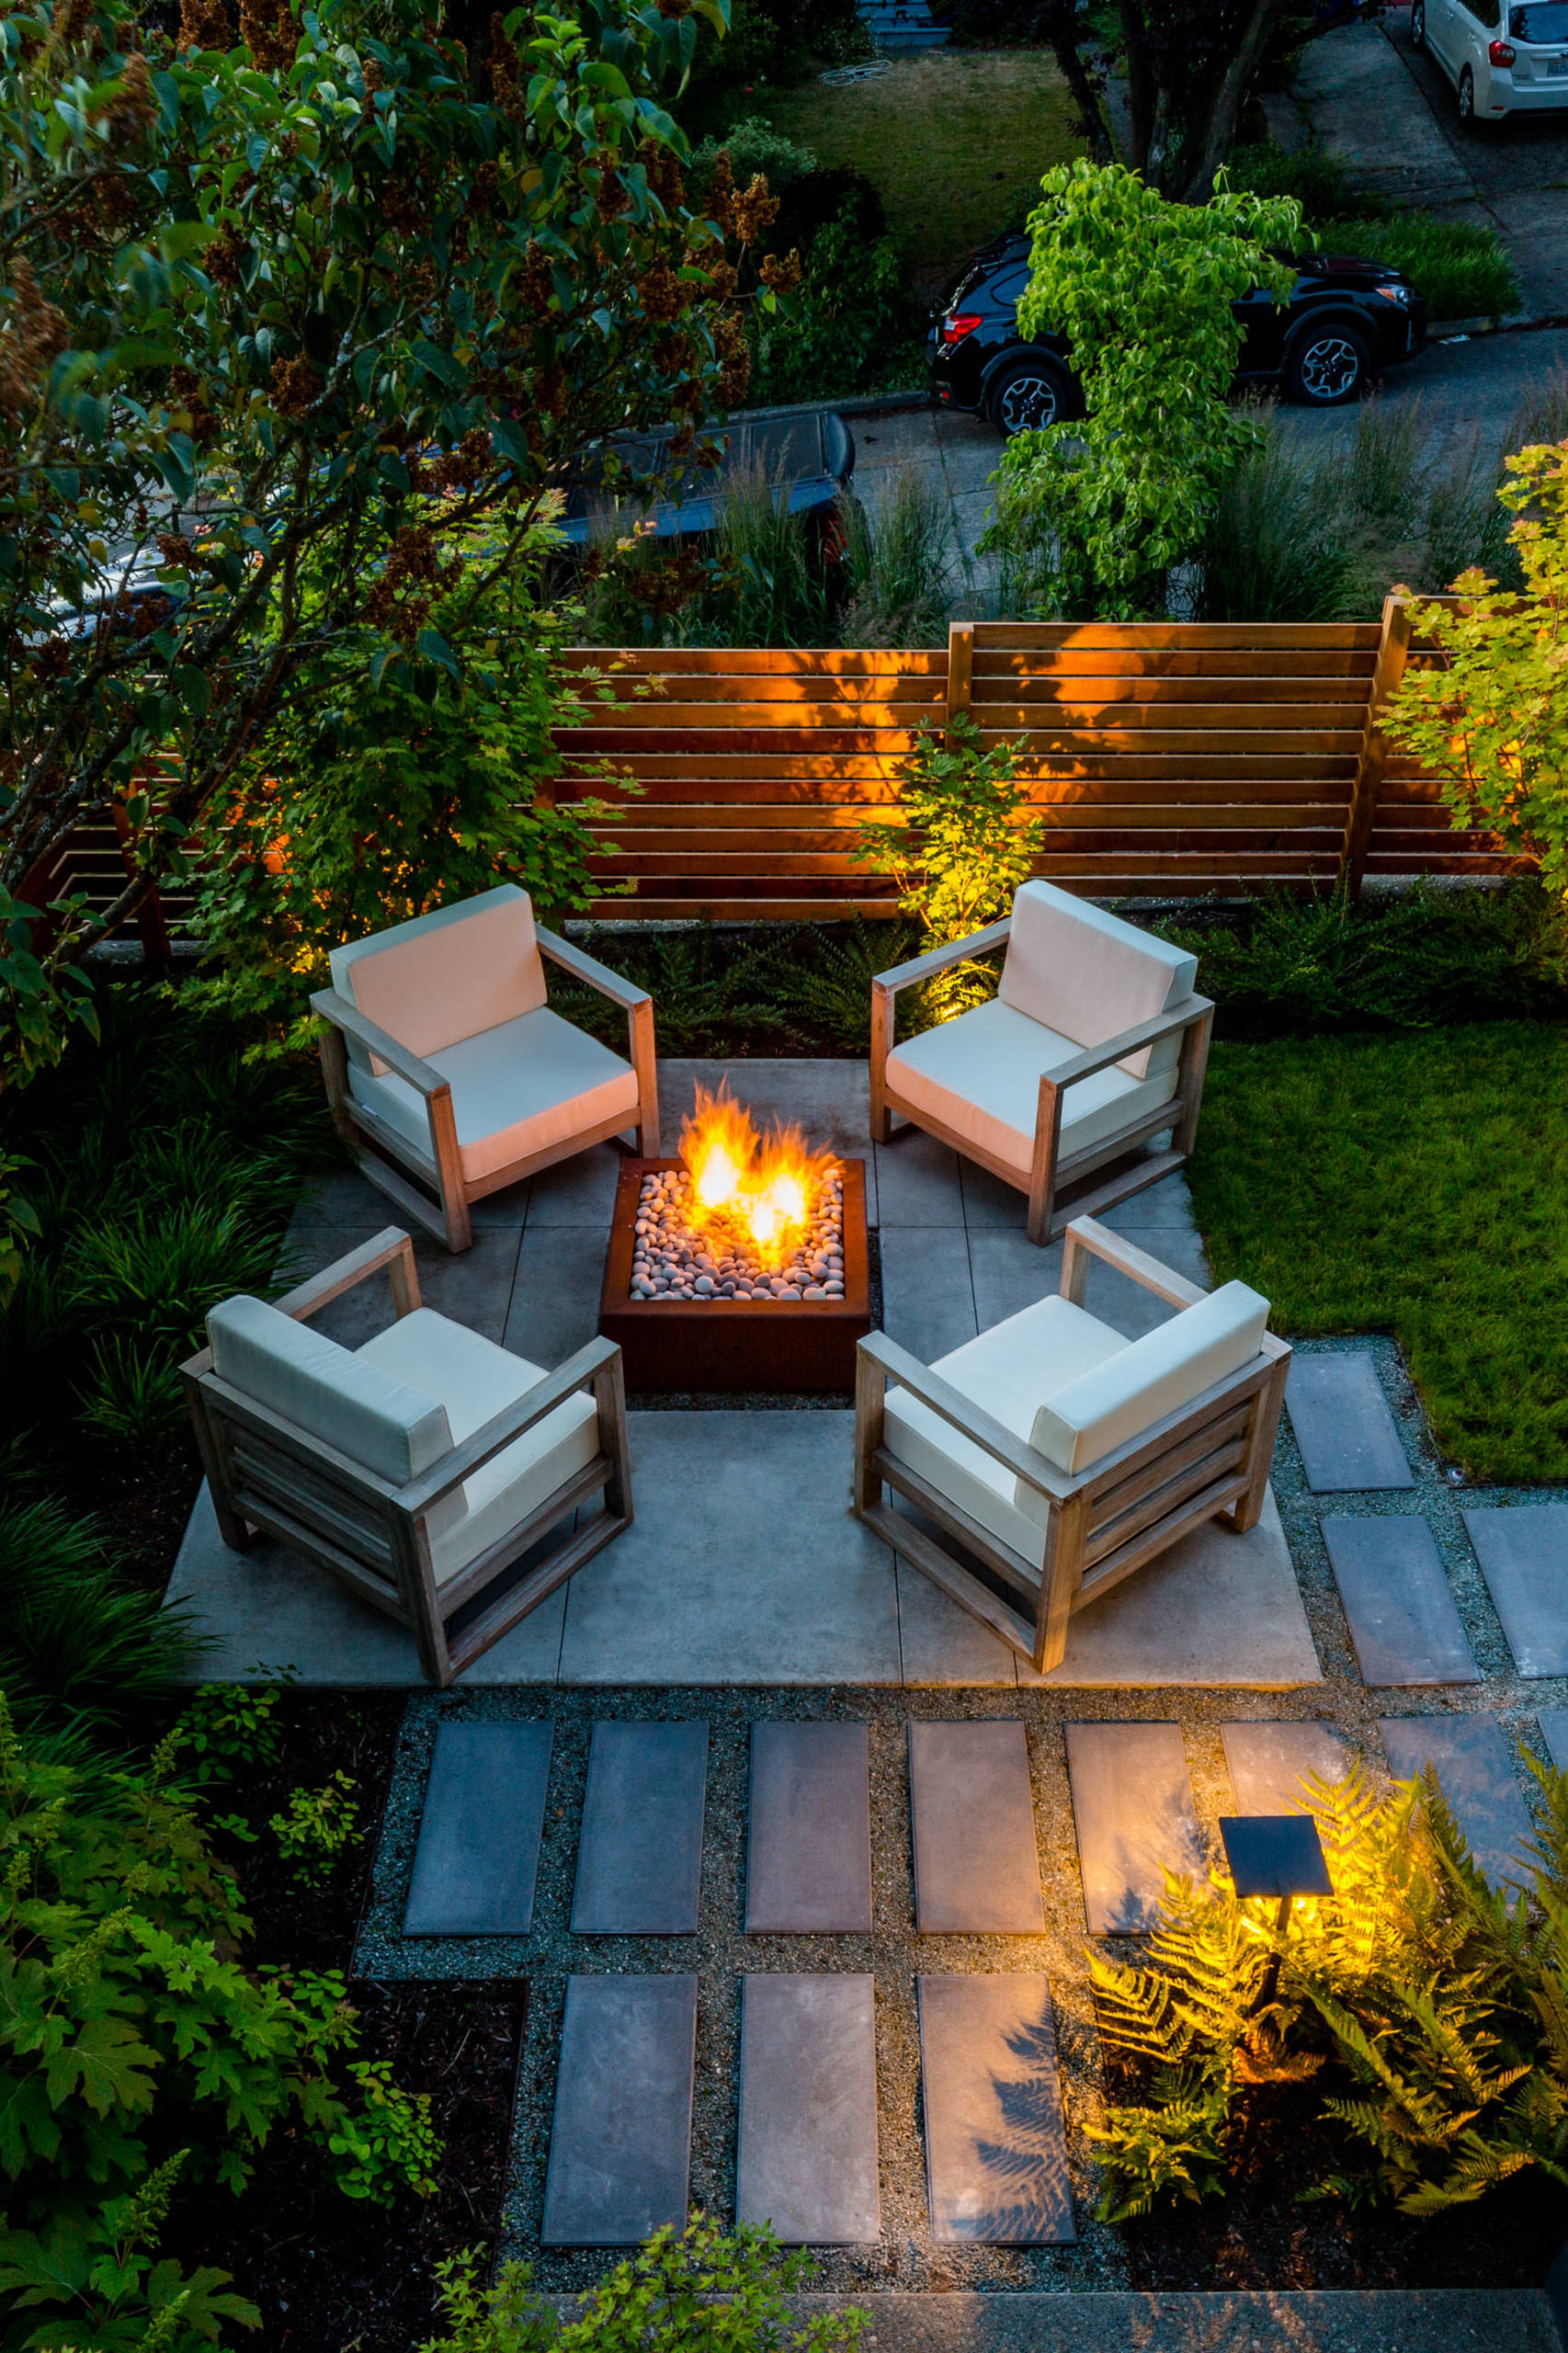 Factors to consider when it comes to backyard landscaping